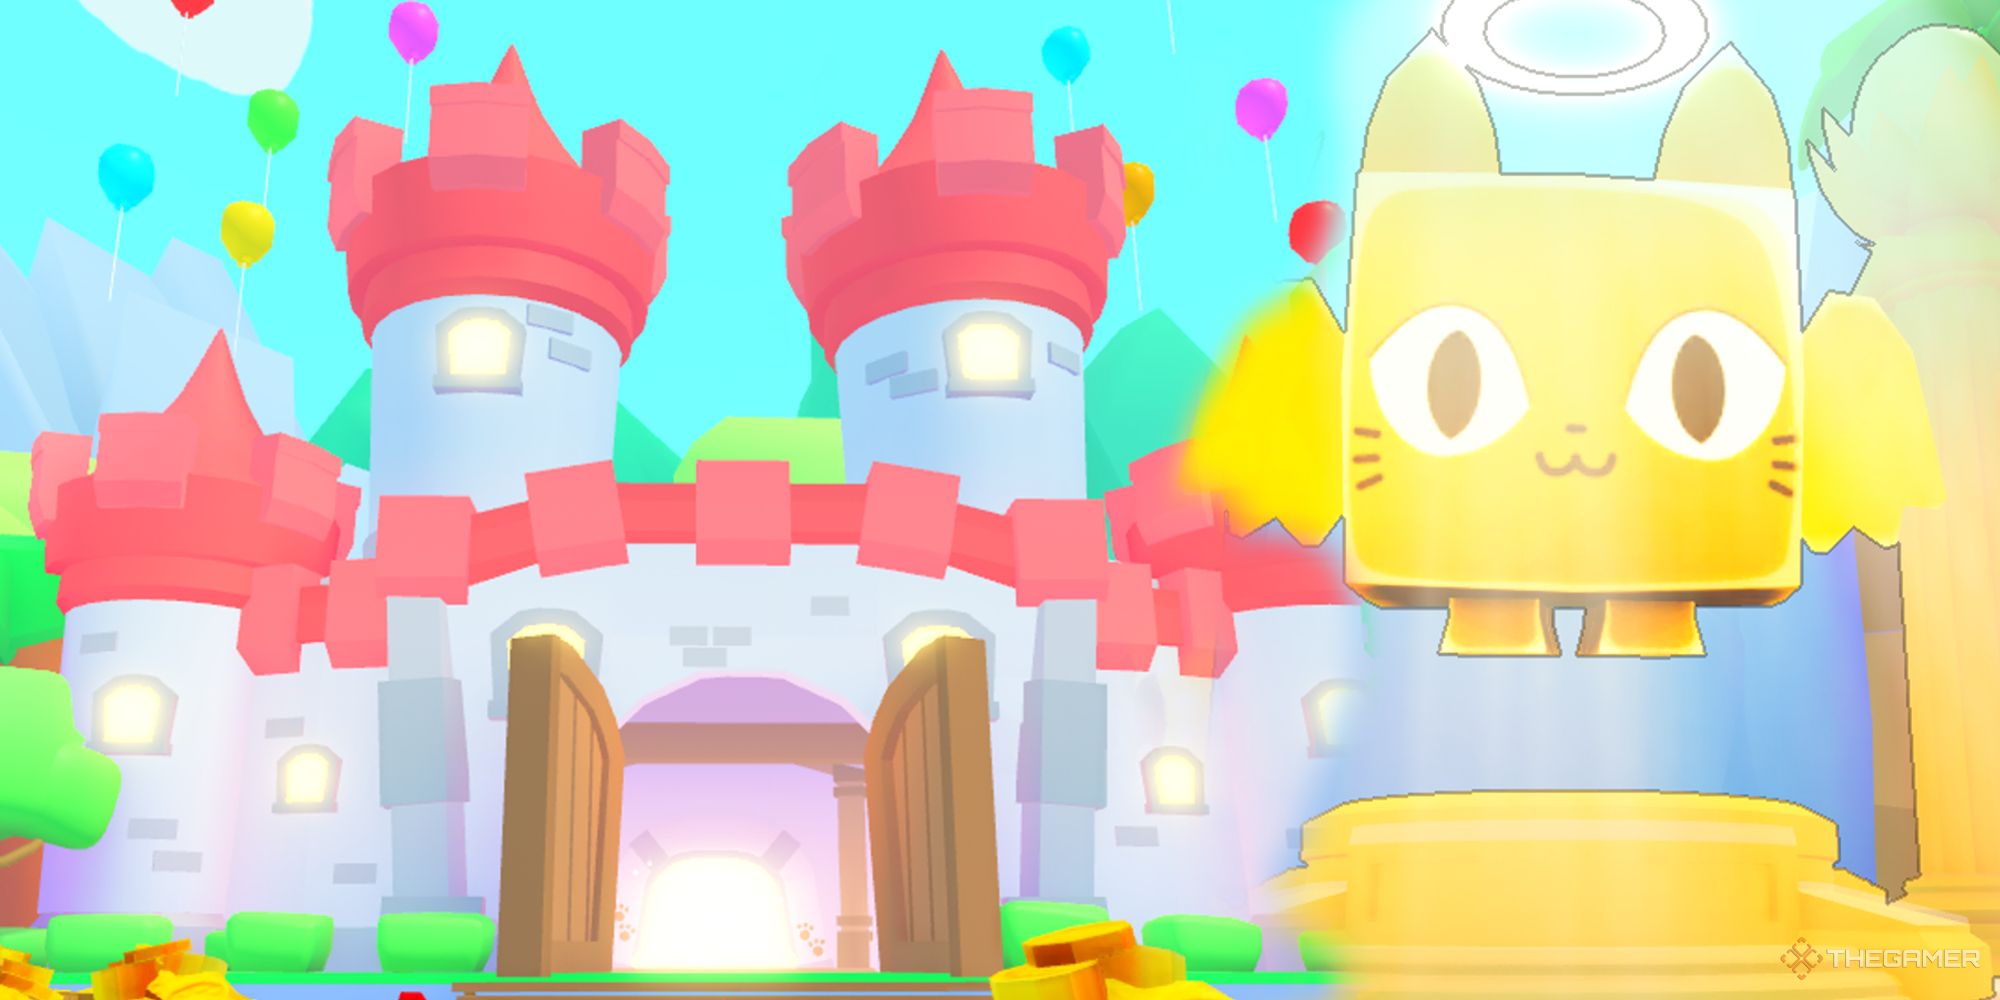 The castle (left) and first rebirth statue, a giant, angelic cat (right) in Pet Simulator 99.